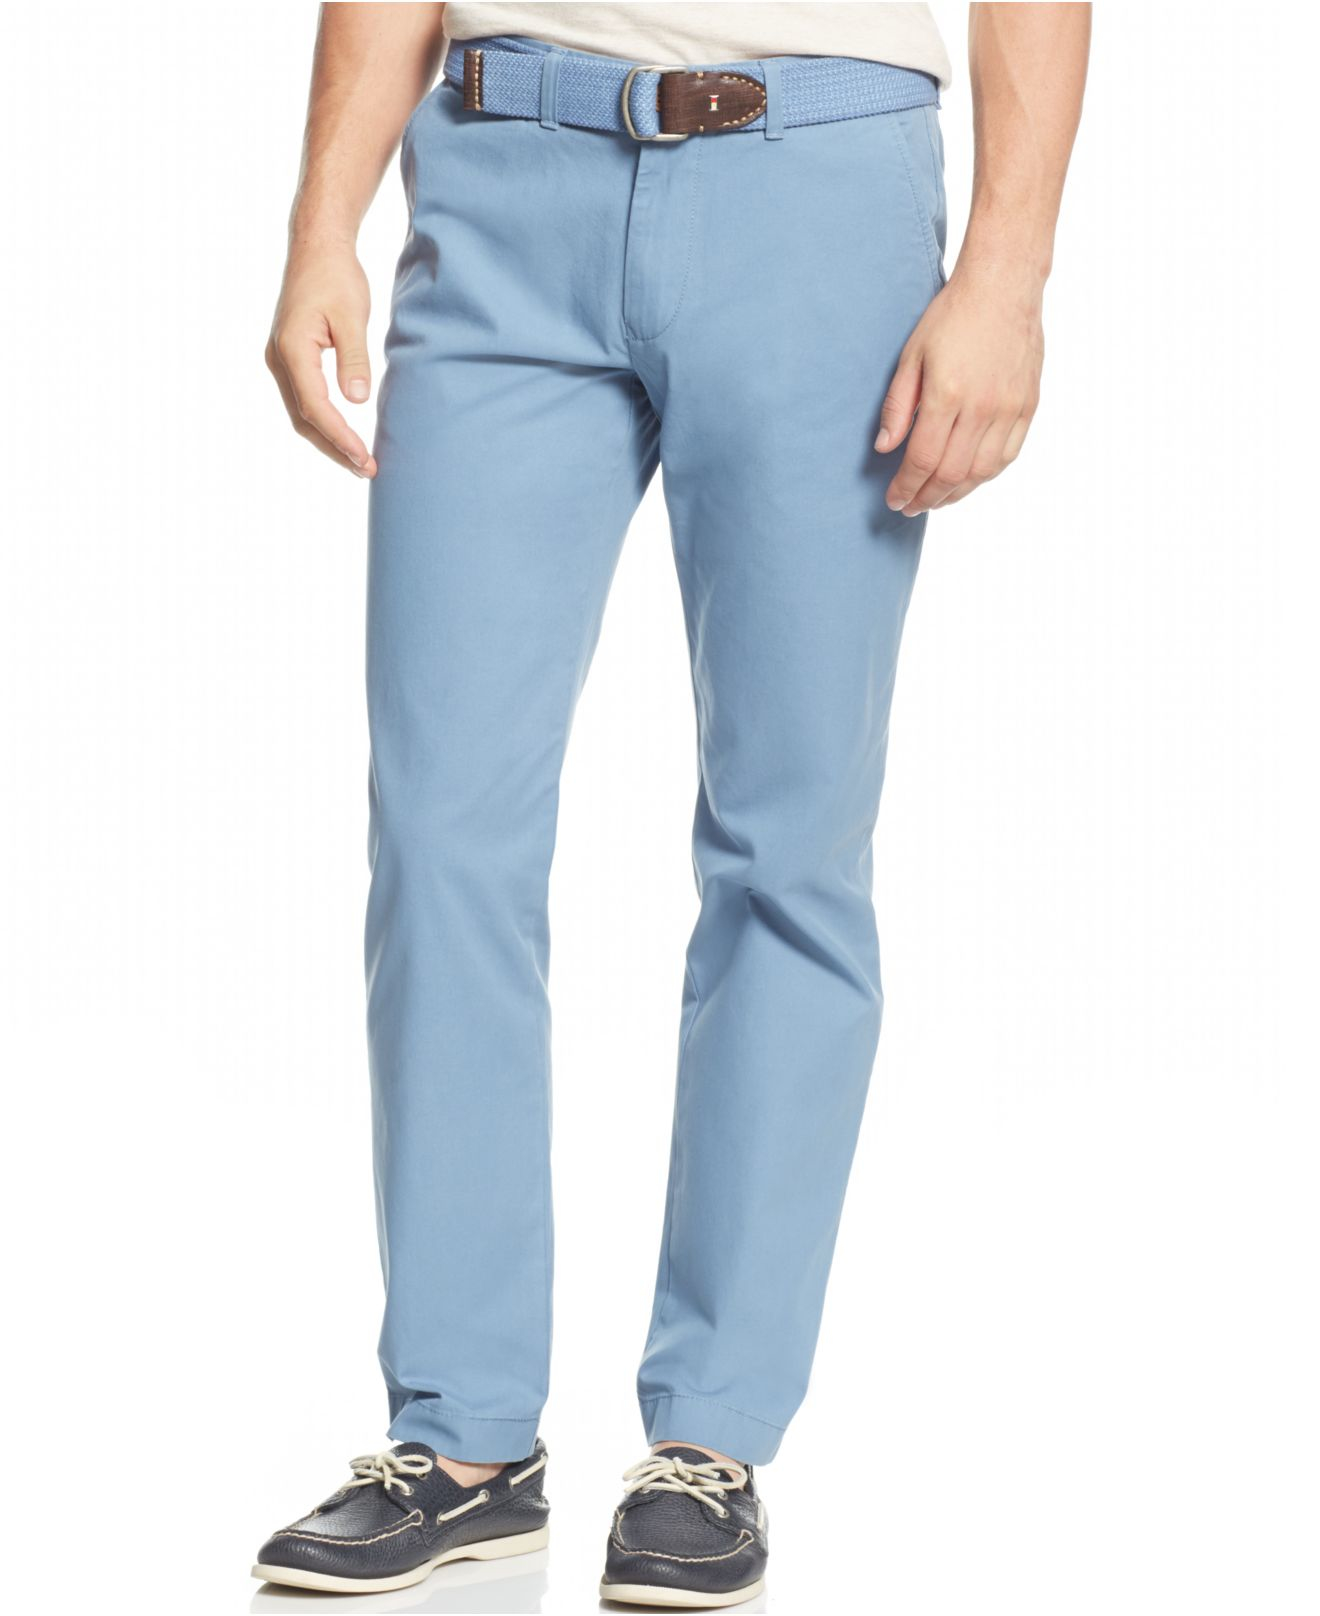 Lyst - Tommy Hilfiger Custom-fit Chino Pants in Blue for Men